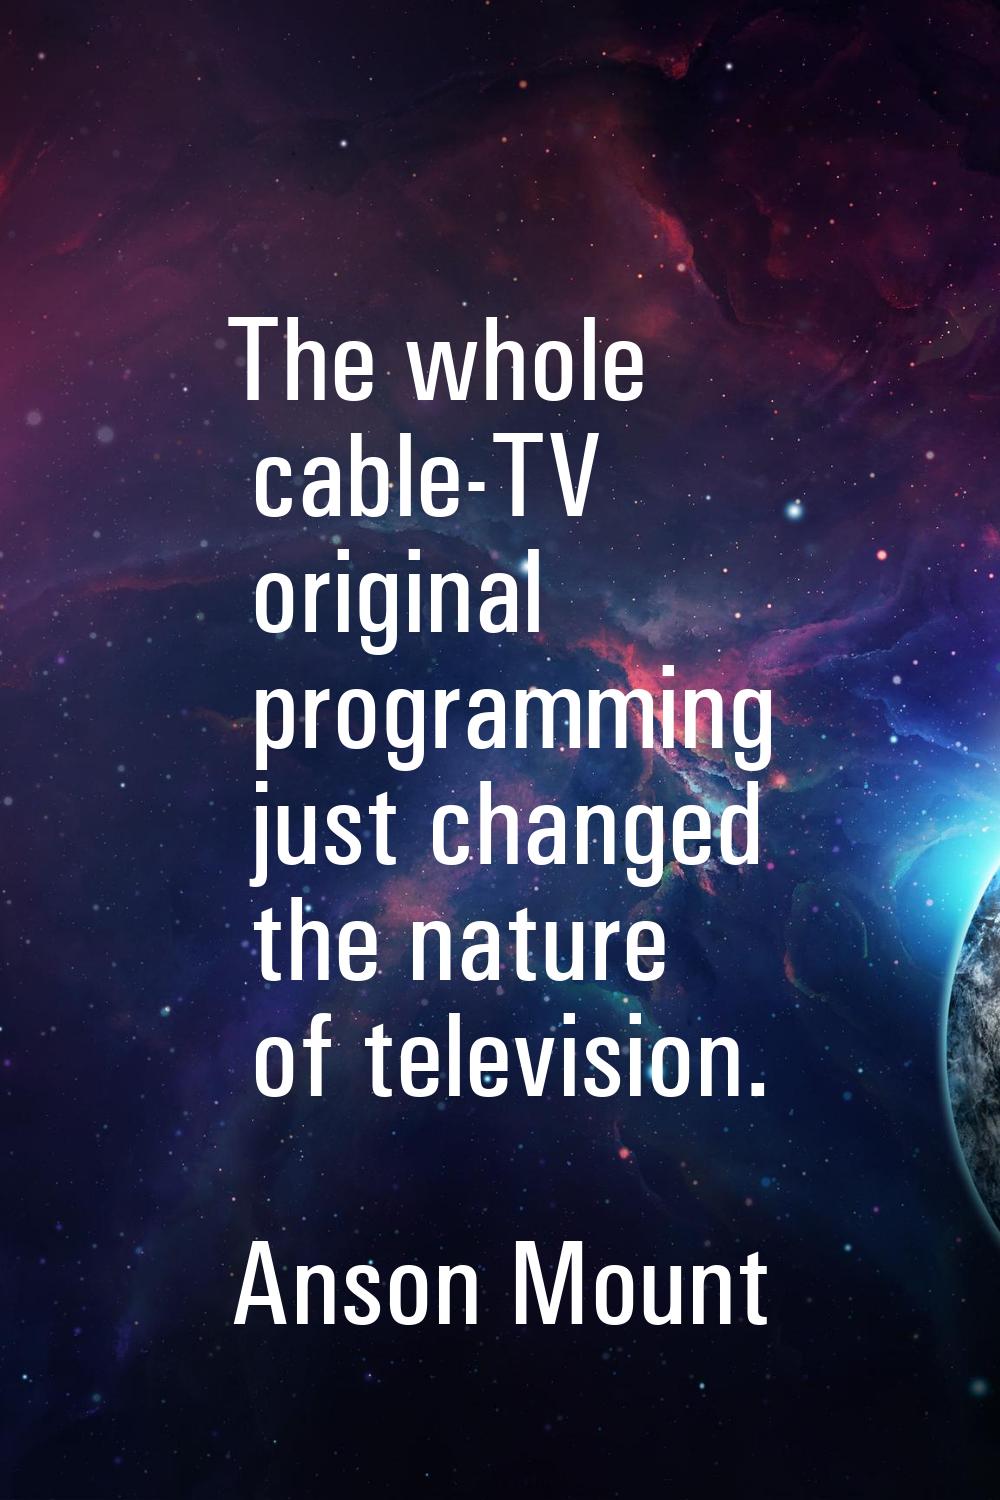 The whole cable-TV original programming just changed the nature of television.